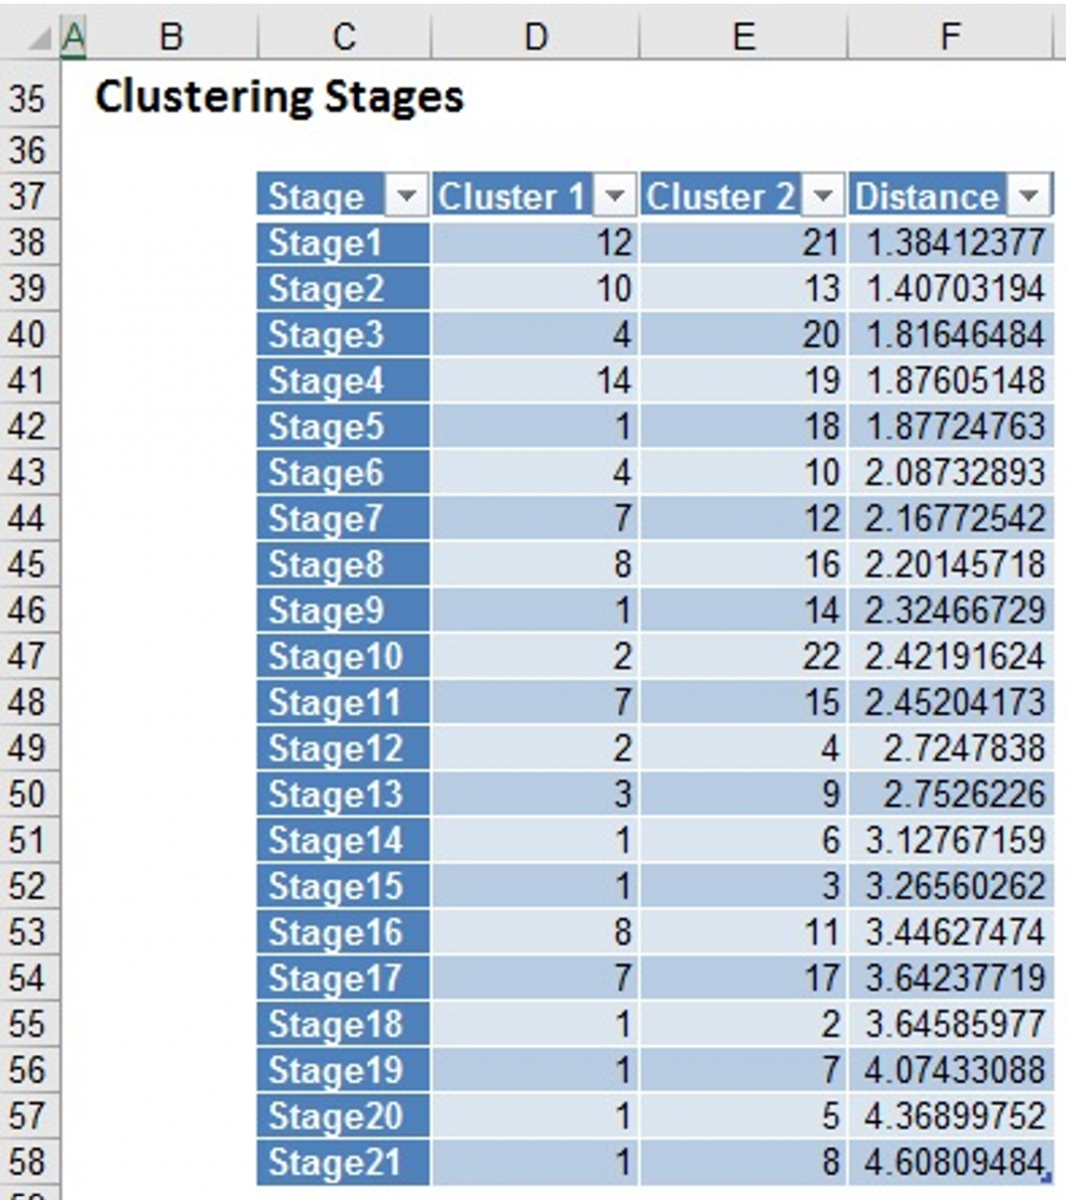 Hierarchical Clustering Output, Clustering Stages